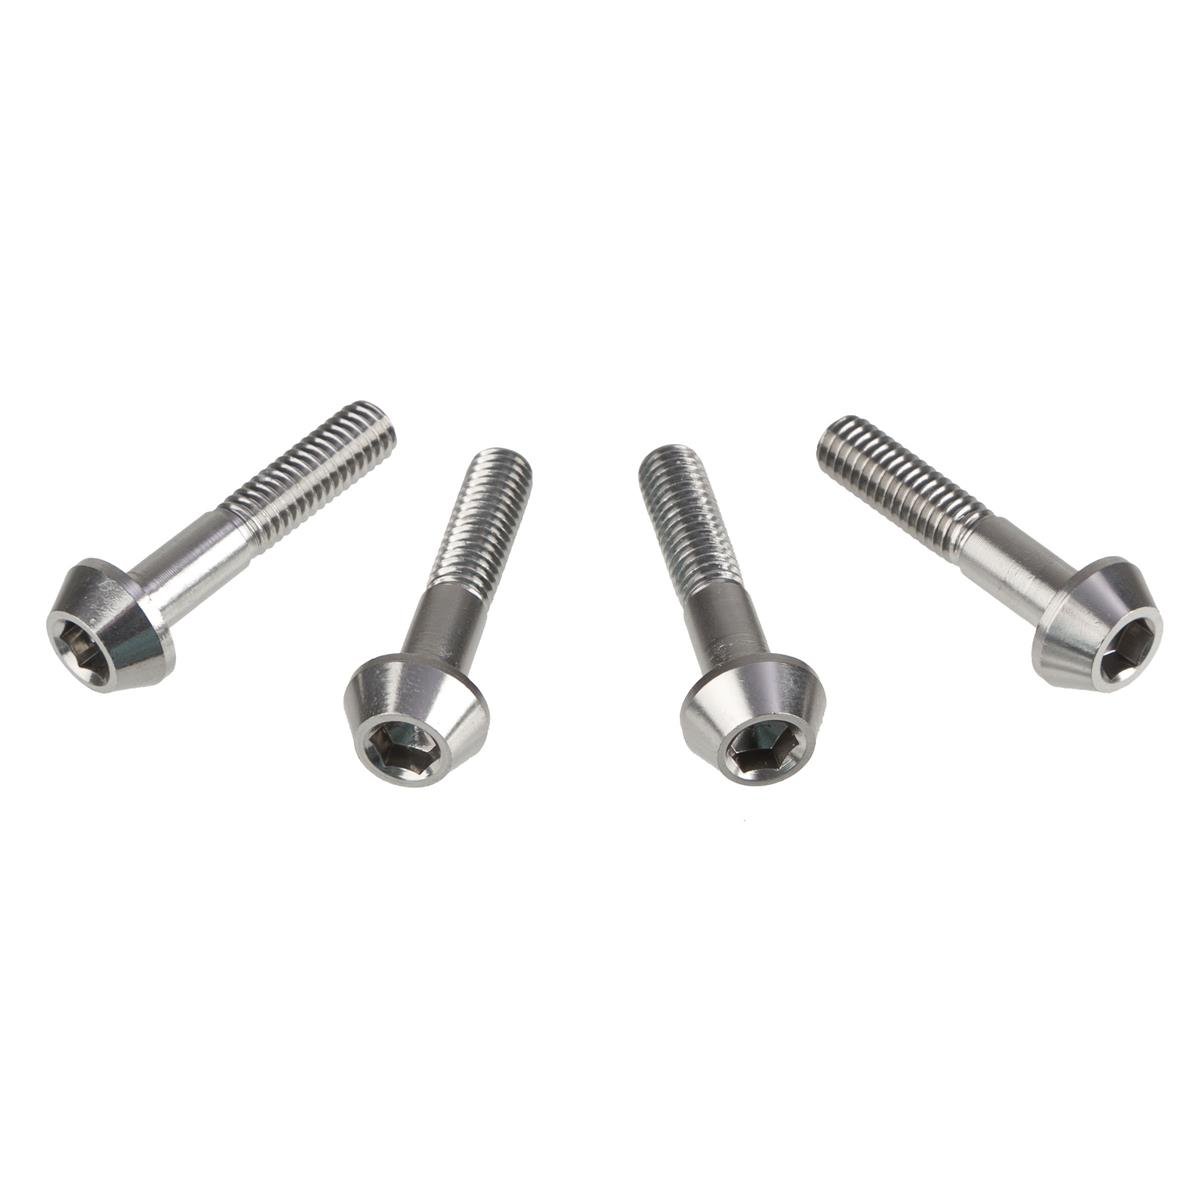 DRC Inner Hex Bolts  M6 x 30 mm, Pack of 4